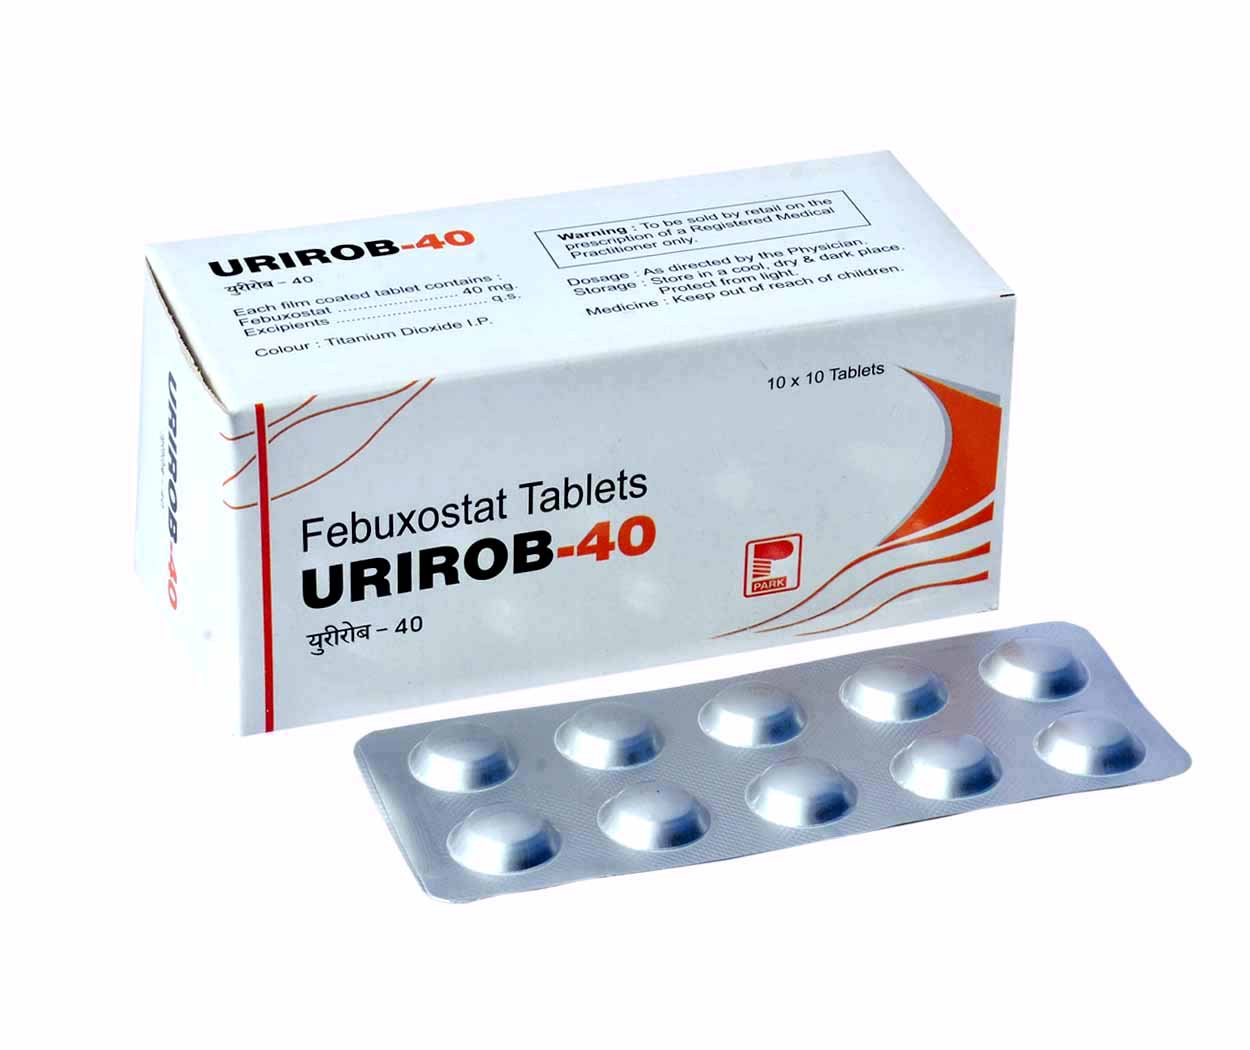 Product Name: URIROB 40, Compositions of URIROB 40 are Febuxostat Tablets - Park Pharmaceuticals